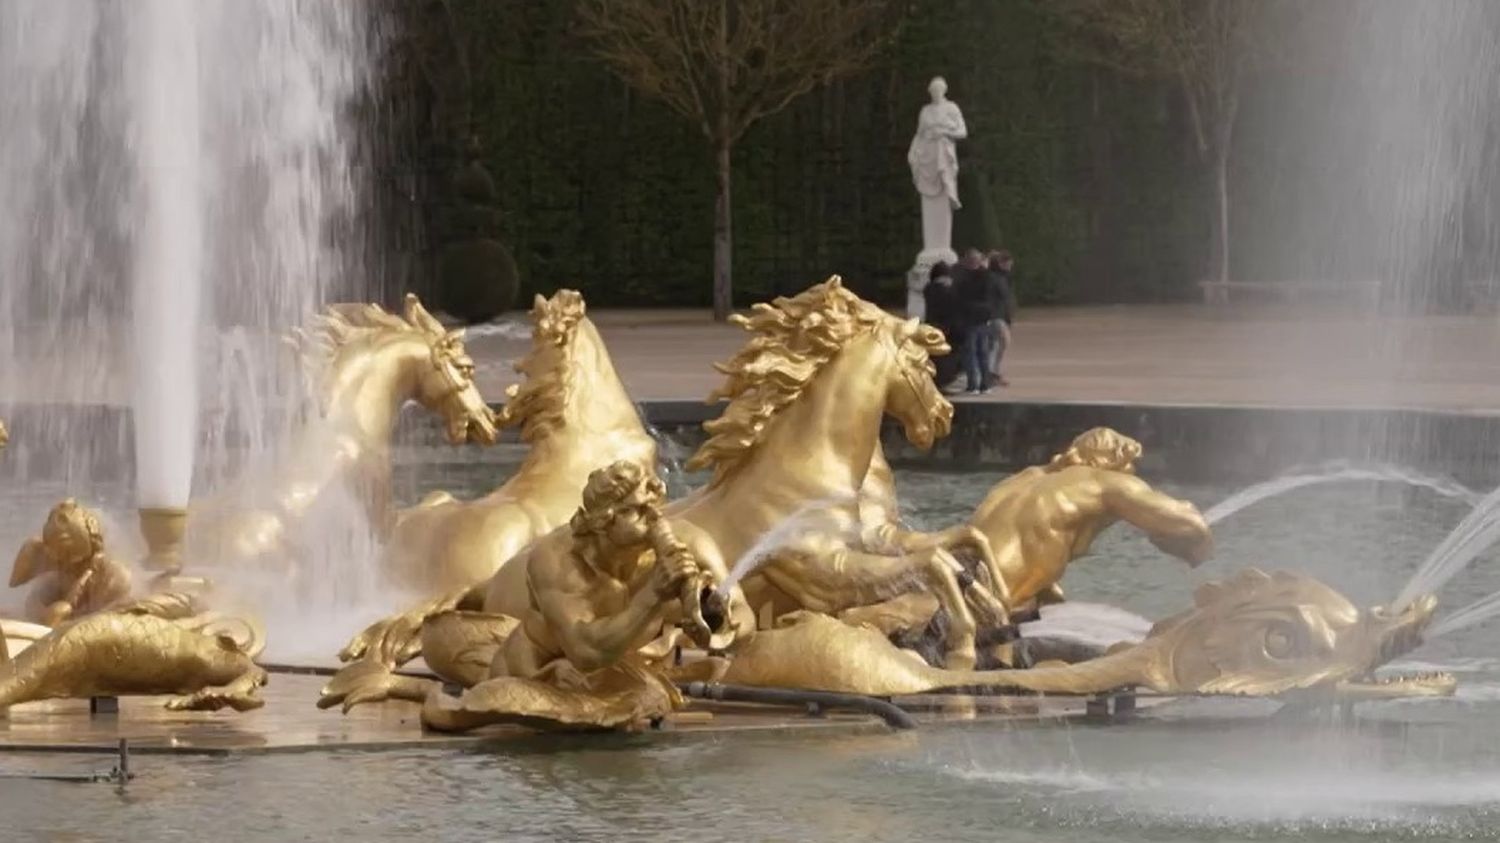 Palace of Versailles: the famous Apollo pool is back